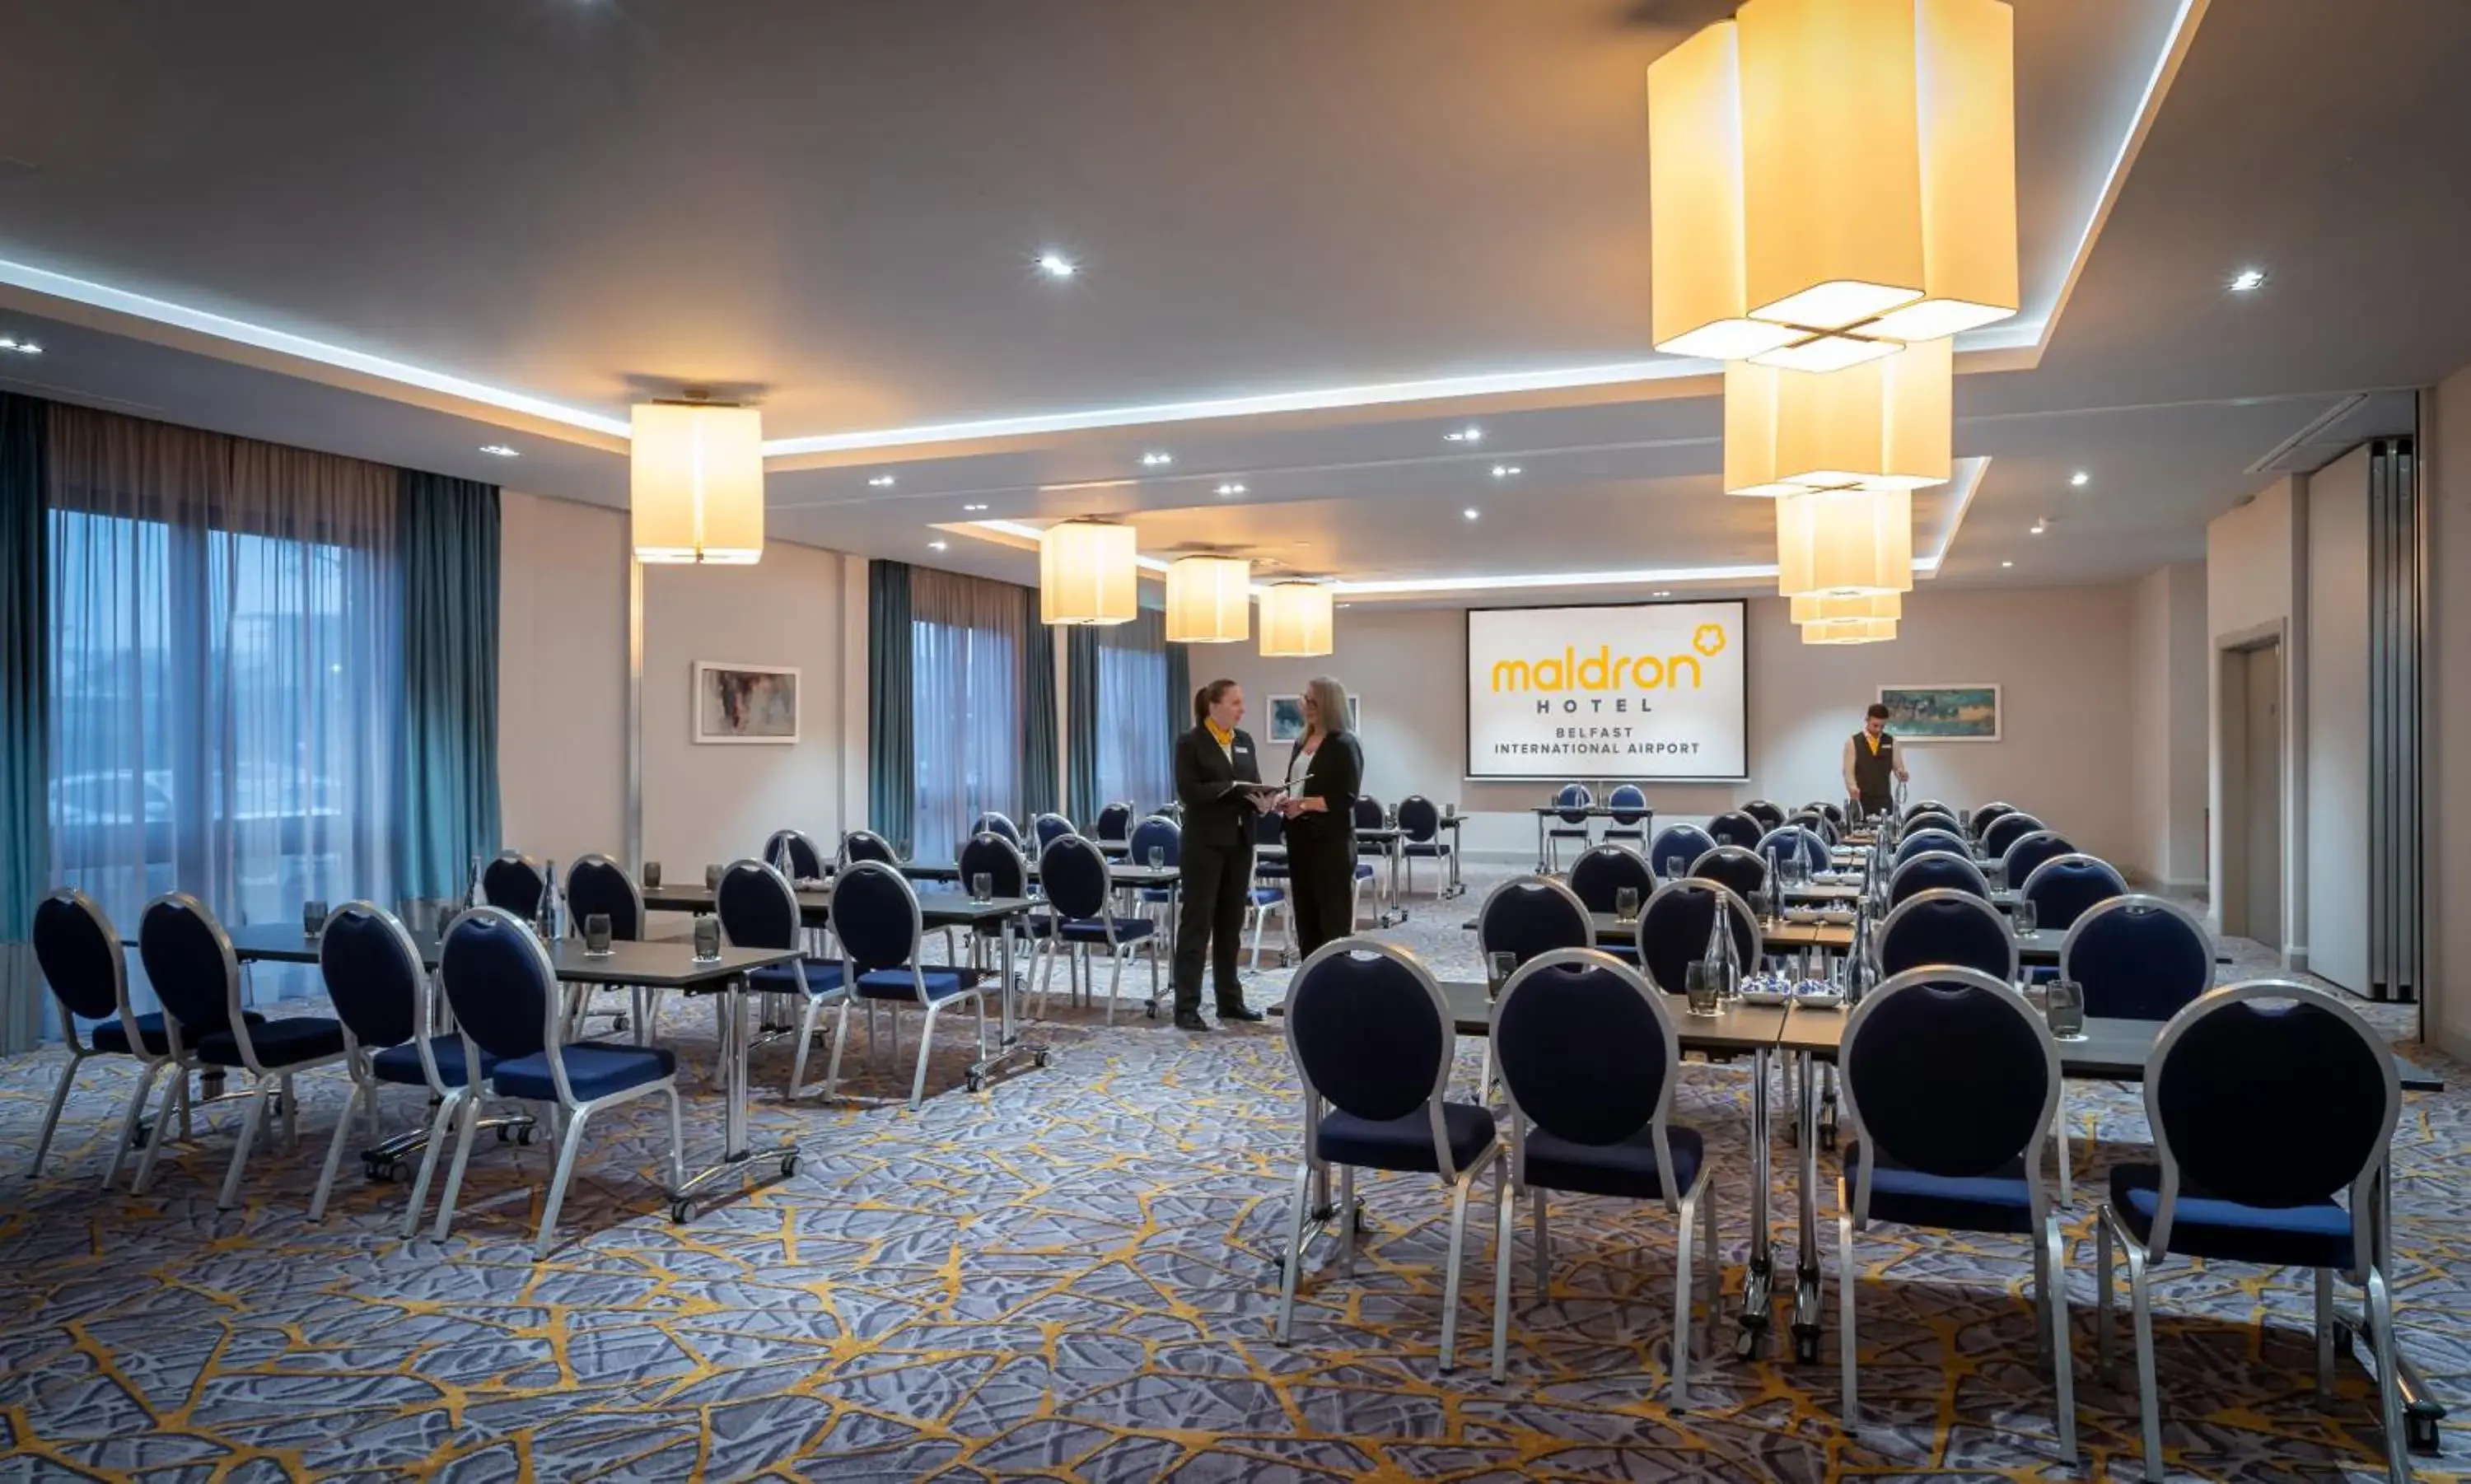 Meeting/conference room in Maldron Hotel Belfast International Airport